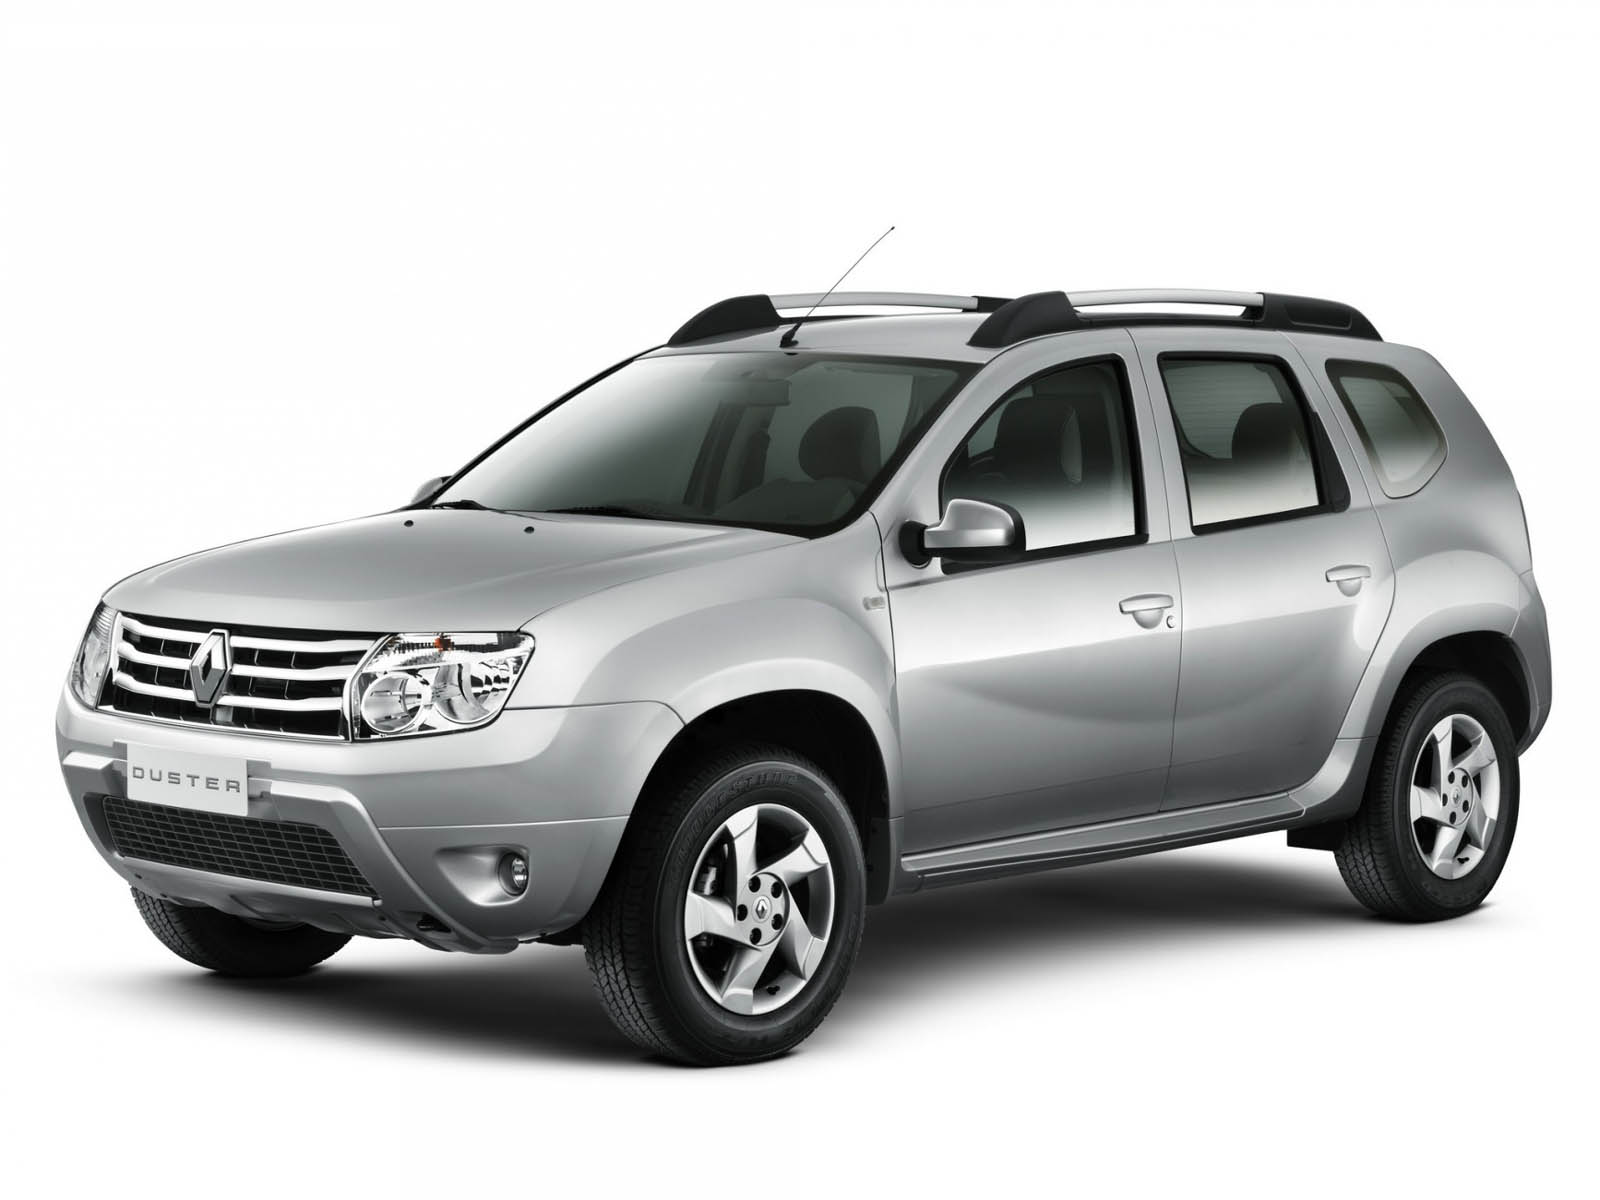 Tag: Renault Duster Car Wallpapers, Images, Photos, Pictures and ...